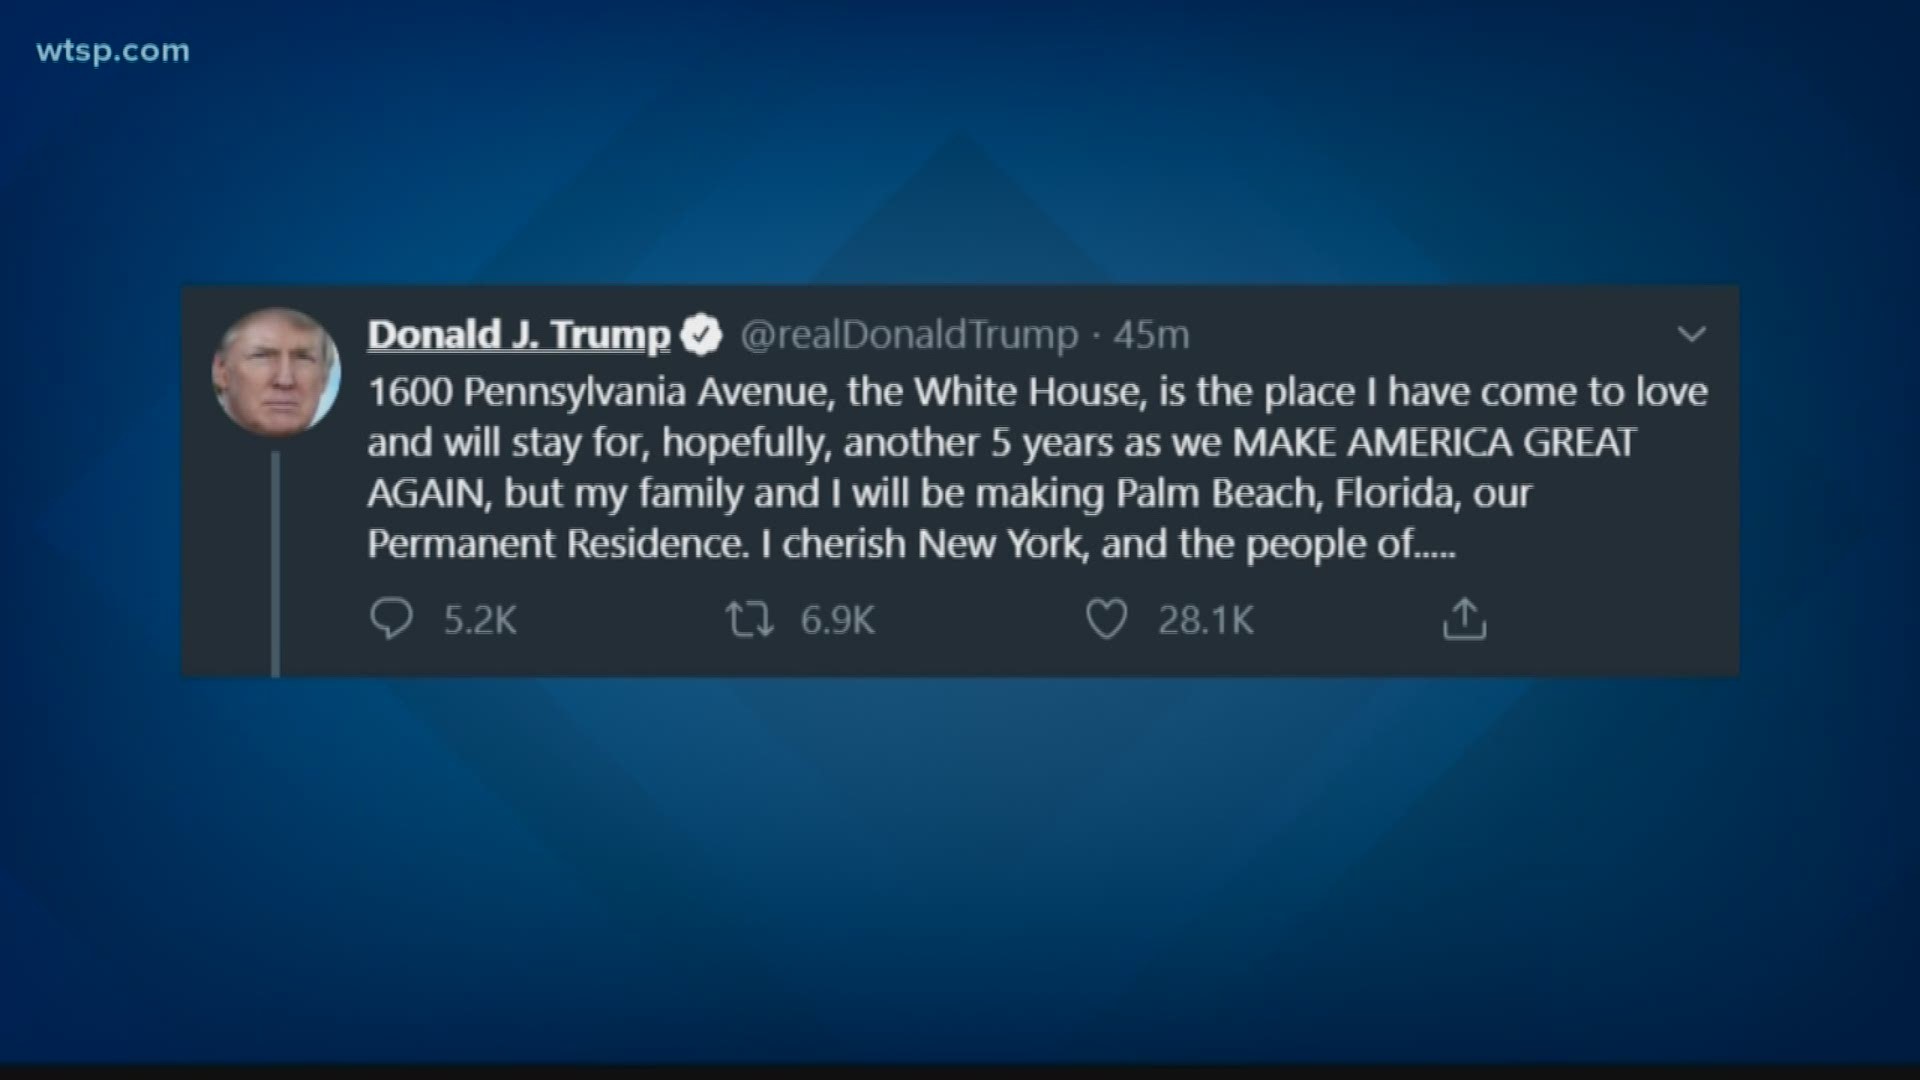 President Trump has announced that he and his family will be calling the sunshine state their permanent residence. https://bit.ly/31XYpig